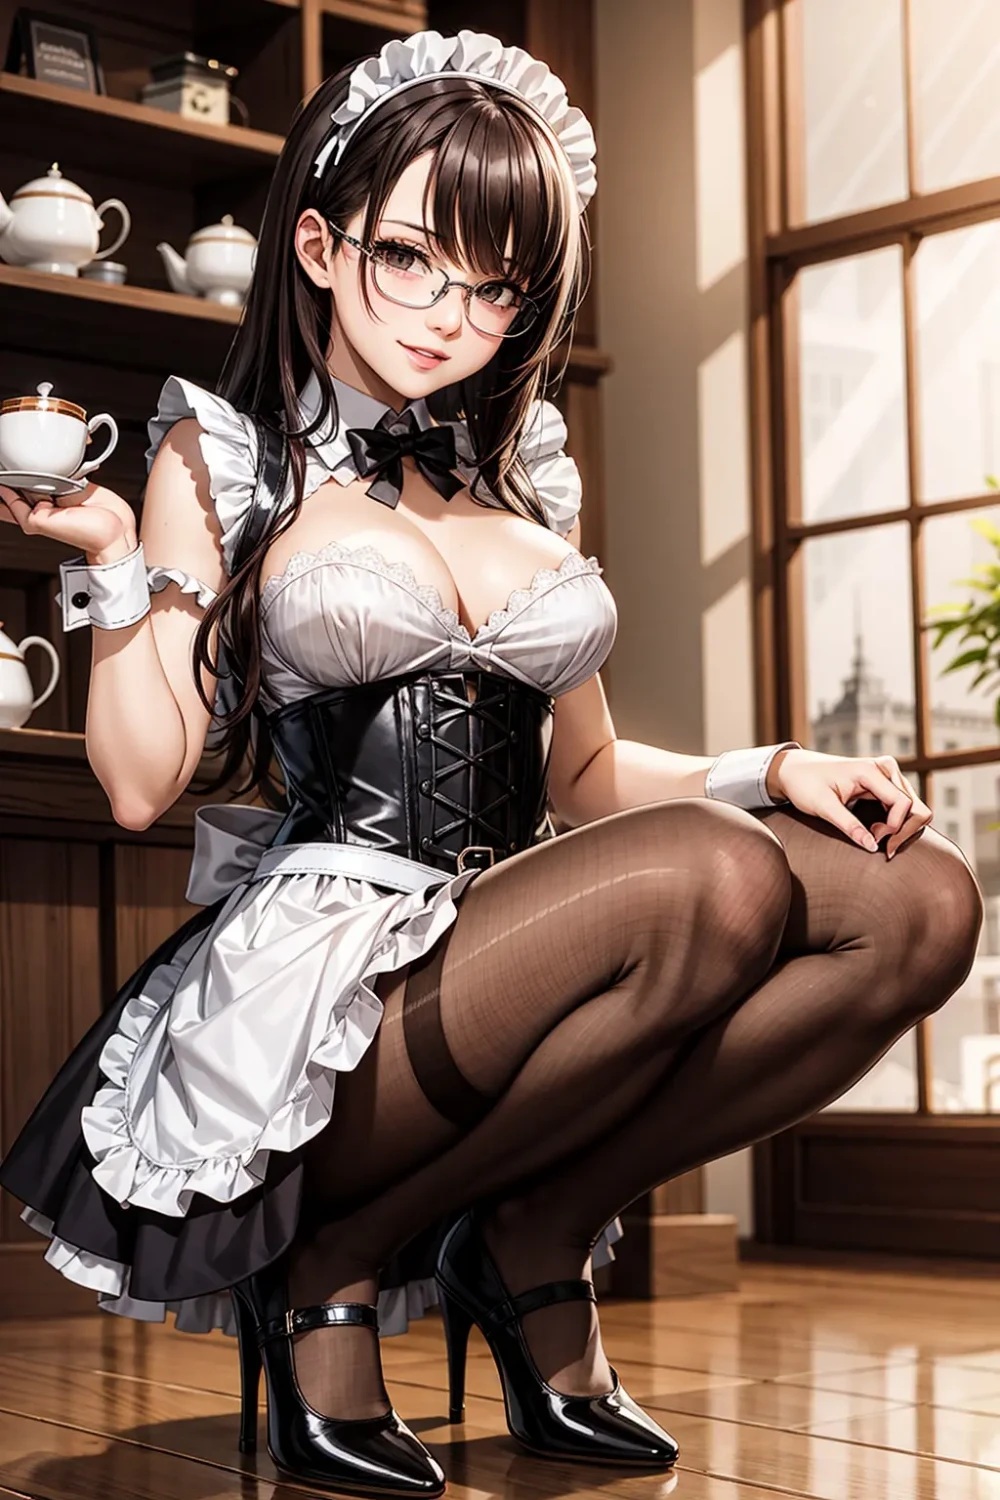 maid-anime-style-all-ages-40